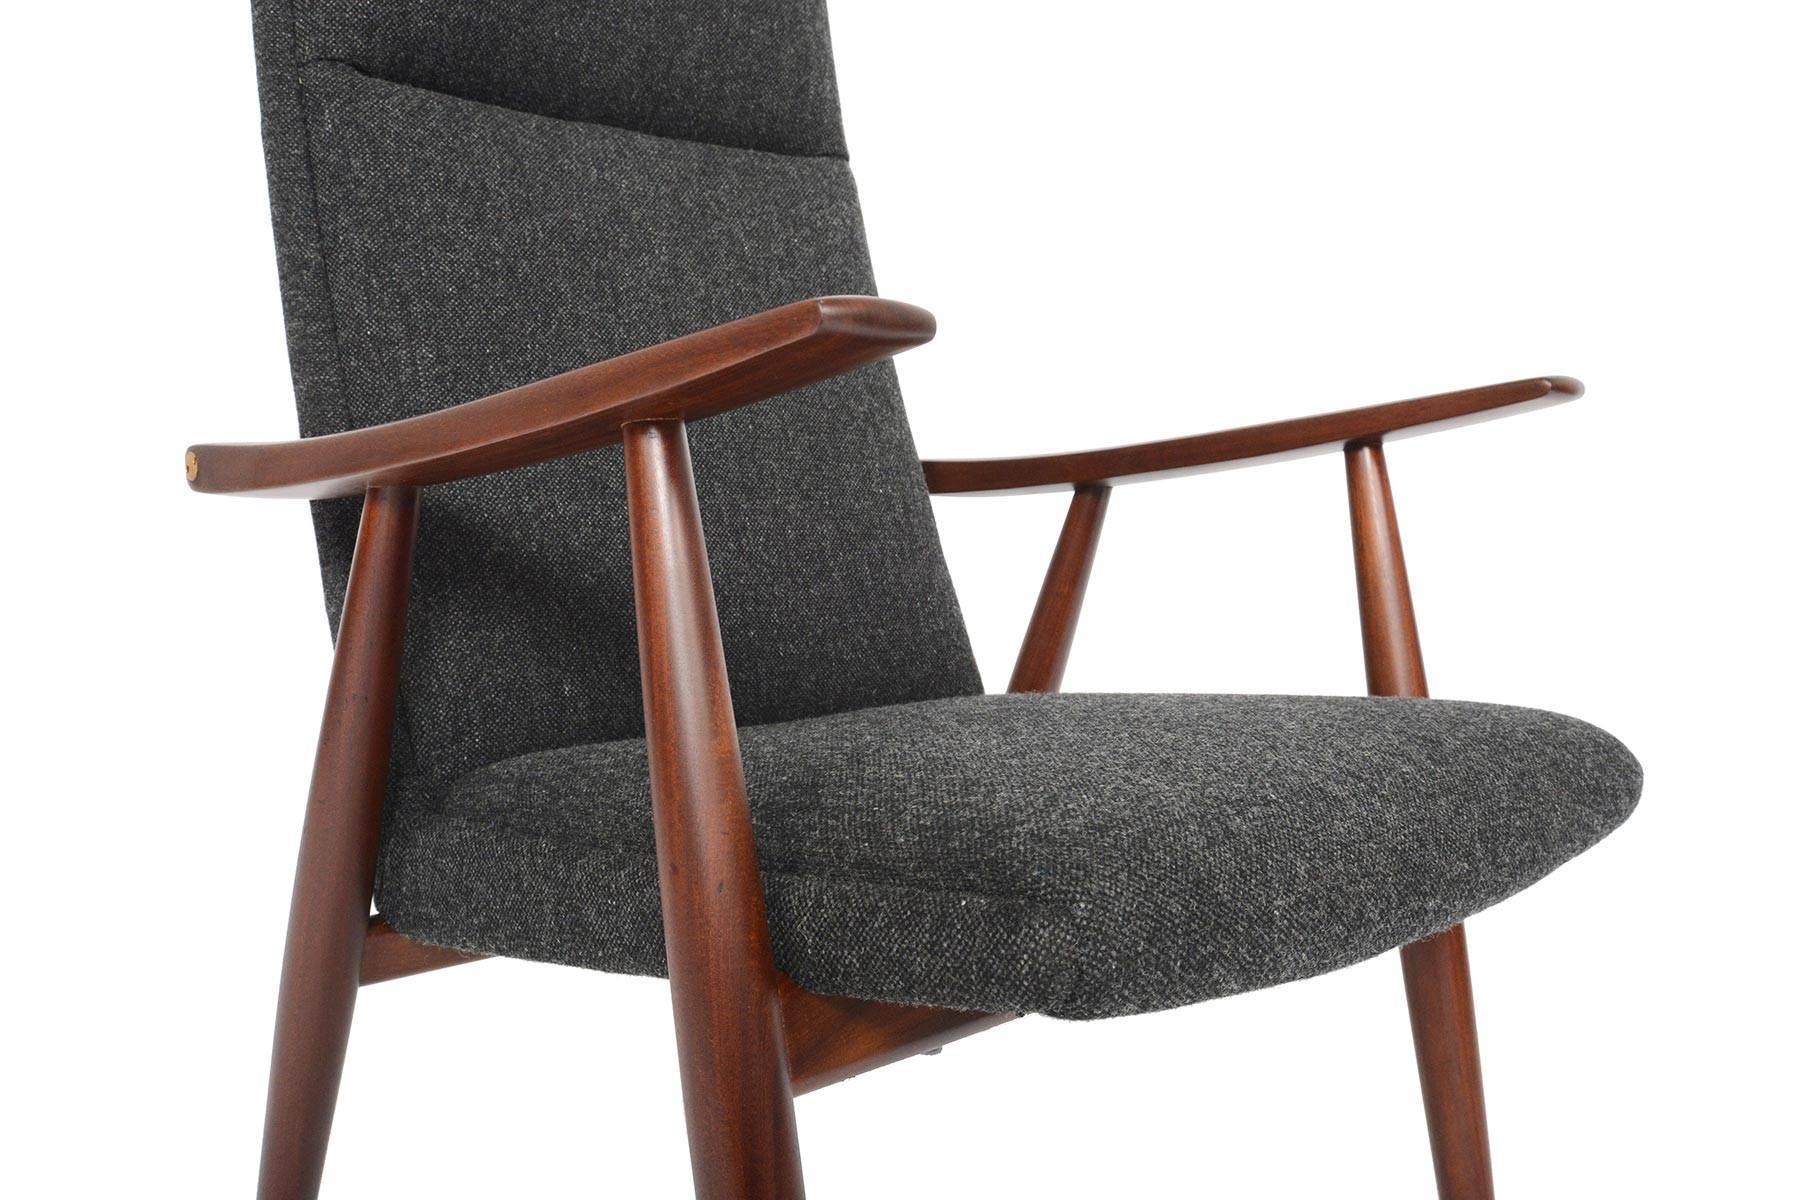 Model GE-260 was designed by Hans Wegner for GETAMA. Crafted in solid teak afrormosia, the ergonomic design of this chair is unparalleled. Large sculpted paddle arms show off the natural beauty of wood grain and are attached with the designer’s